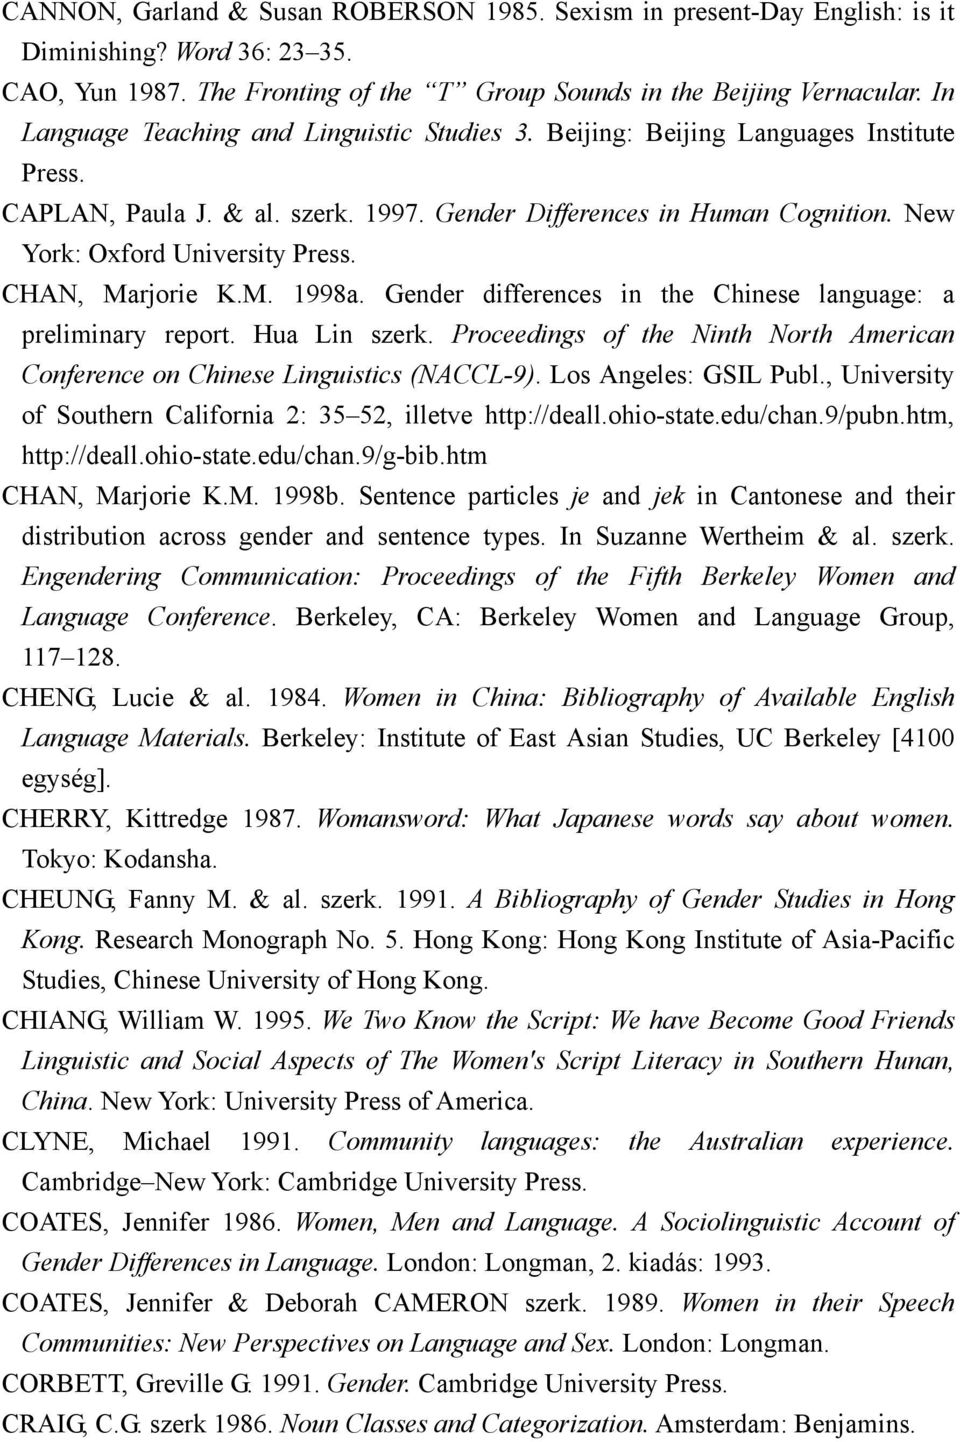 CHAN, Marjorie K.M. 1998a. Gender differences in the Chinese language: a preliminary report. Hua Lin szerk. Proceedings of the Ninth North American Conference on Chinese Linguistics (NACCL-9).